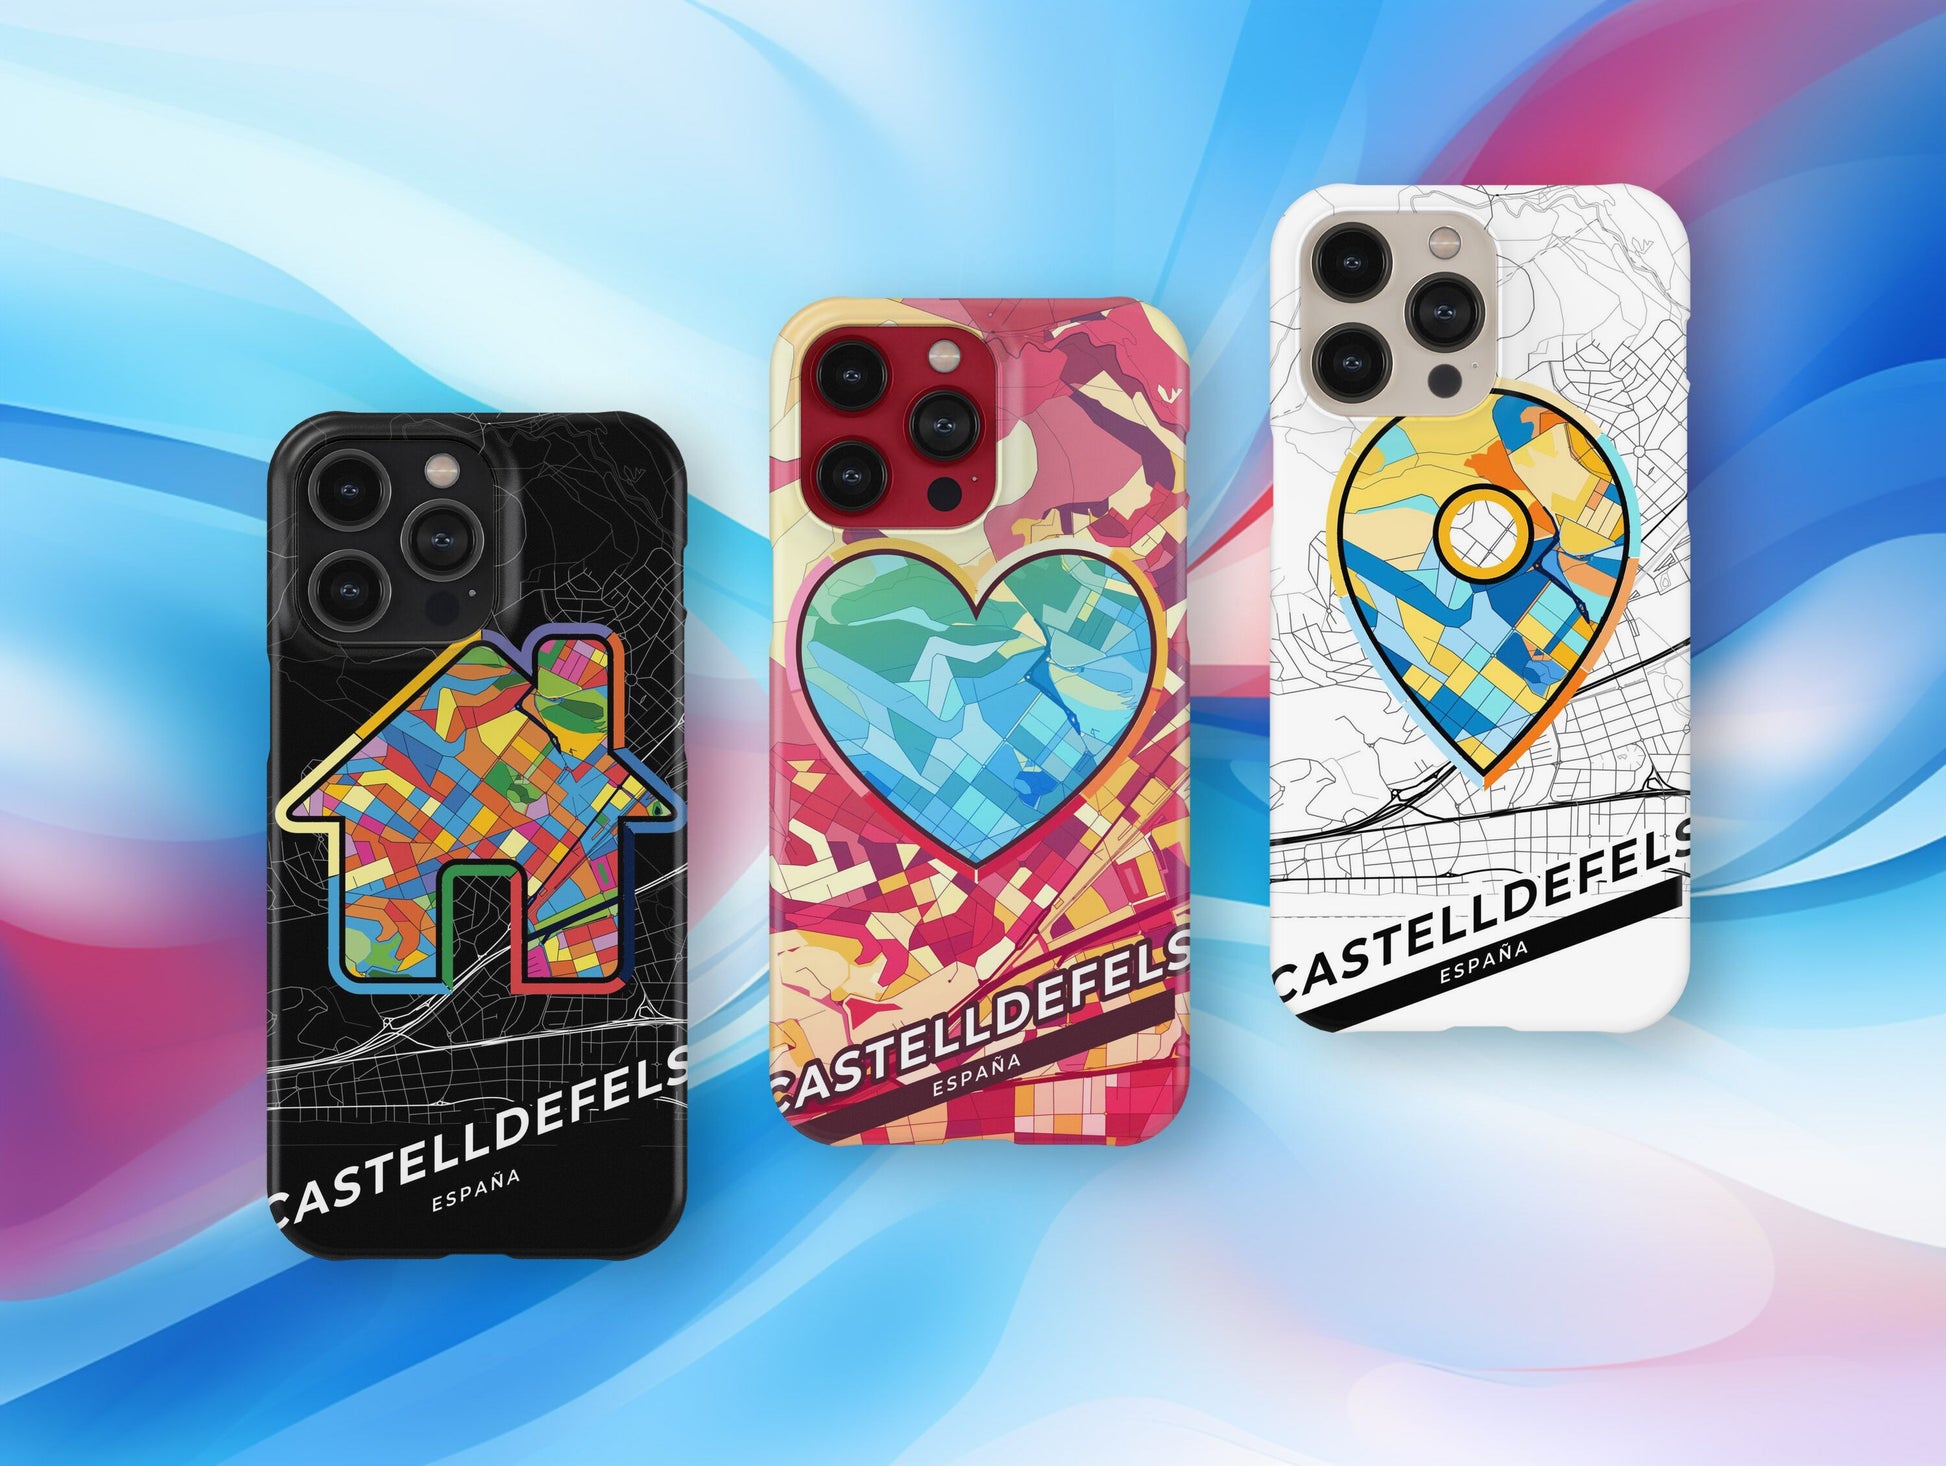 Castelldefels Spain slim phone case with colorful icon. Birthday, wedding or housewarming gift. Couple match cases.